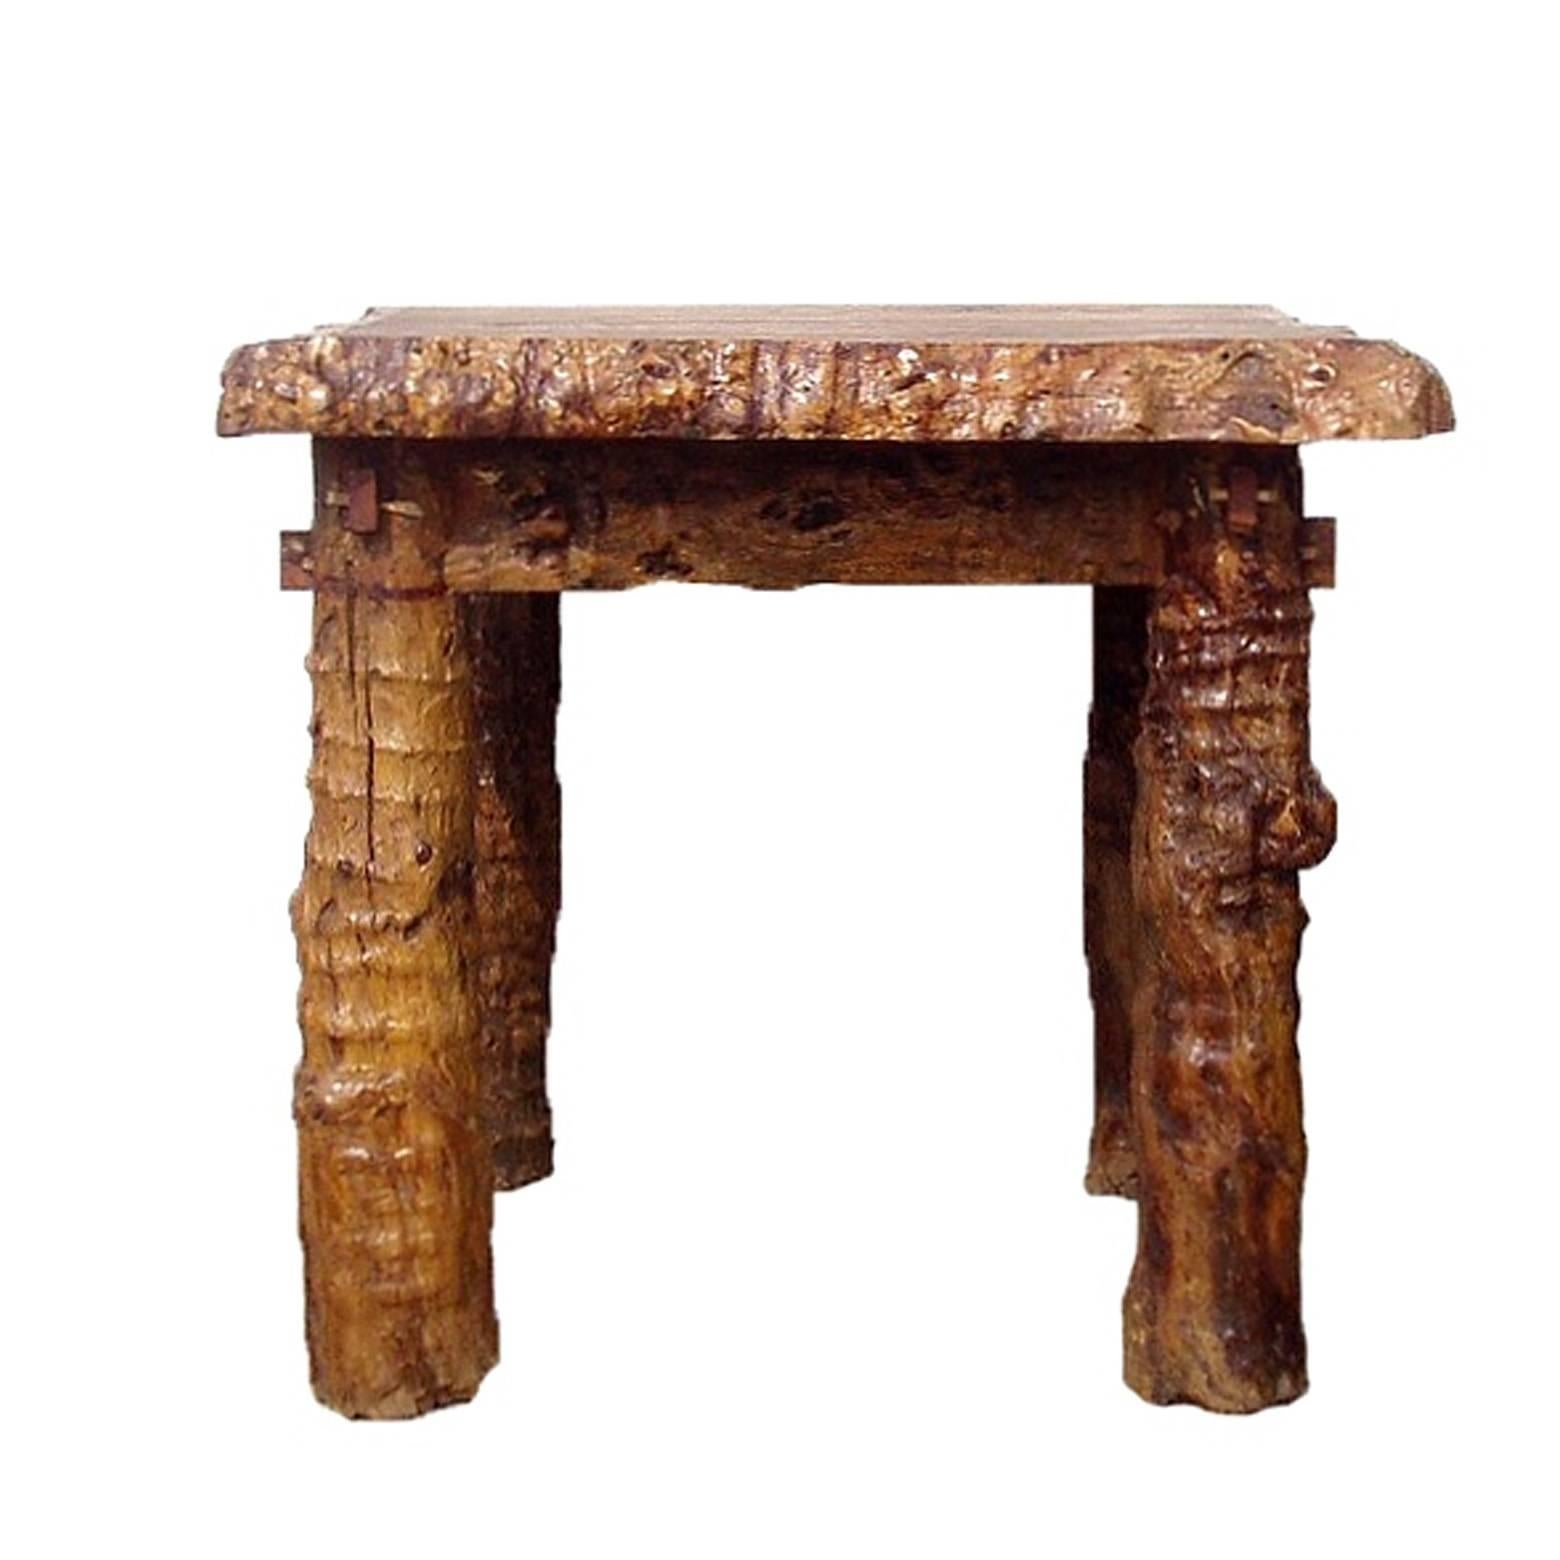 Rustic Log Country Table with Stools, Burl Jujube Solid Wood Table Set of Four 1